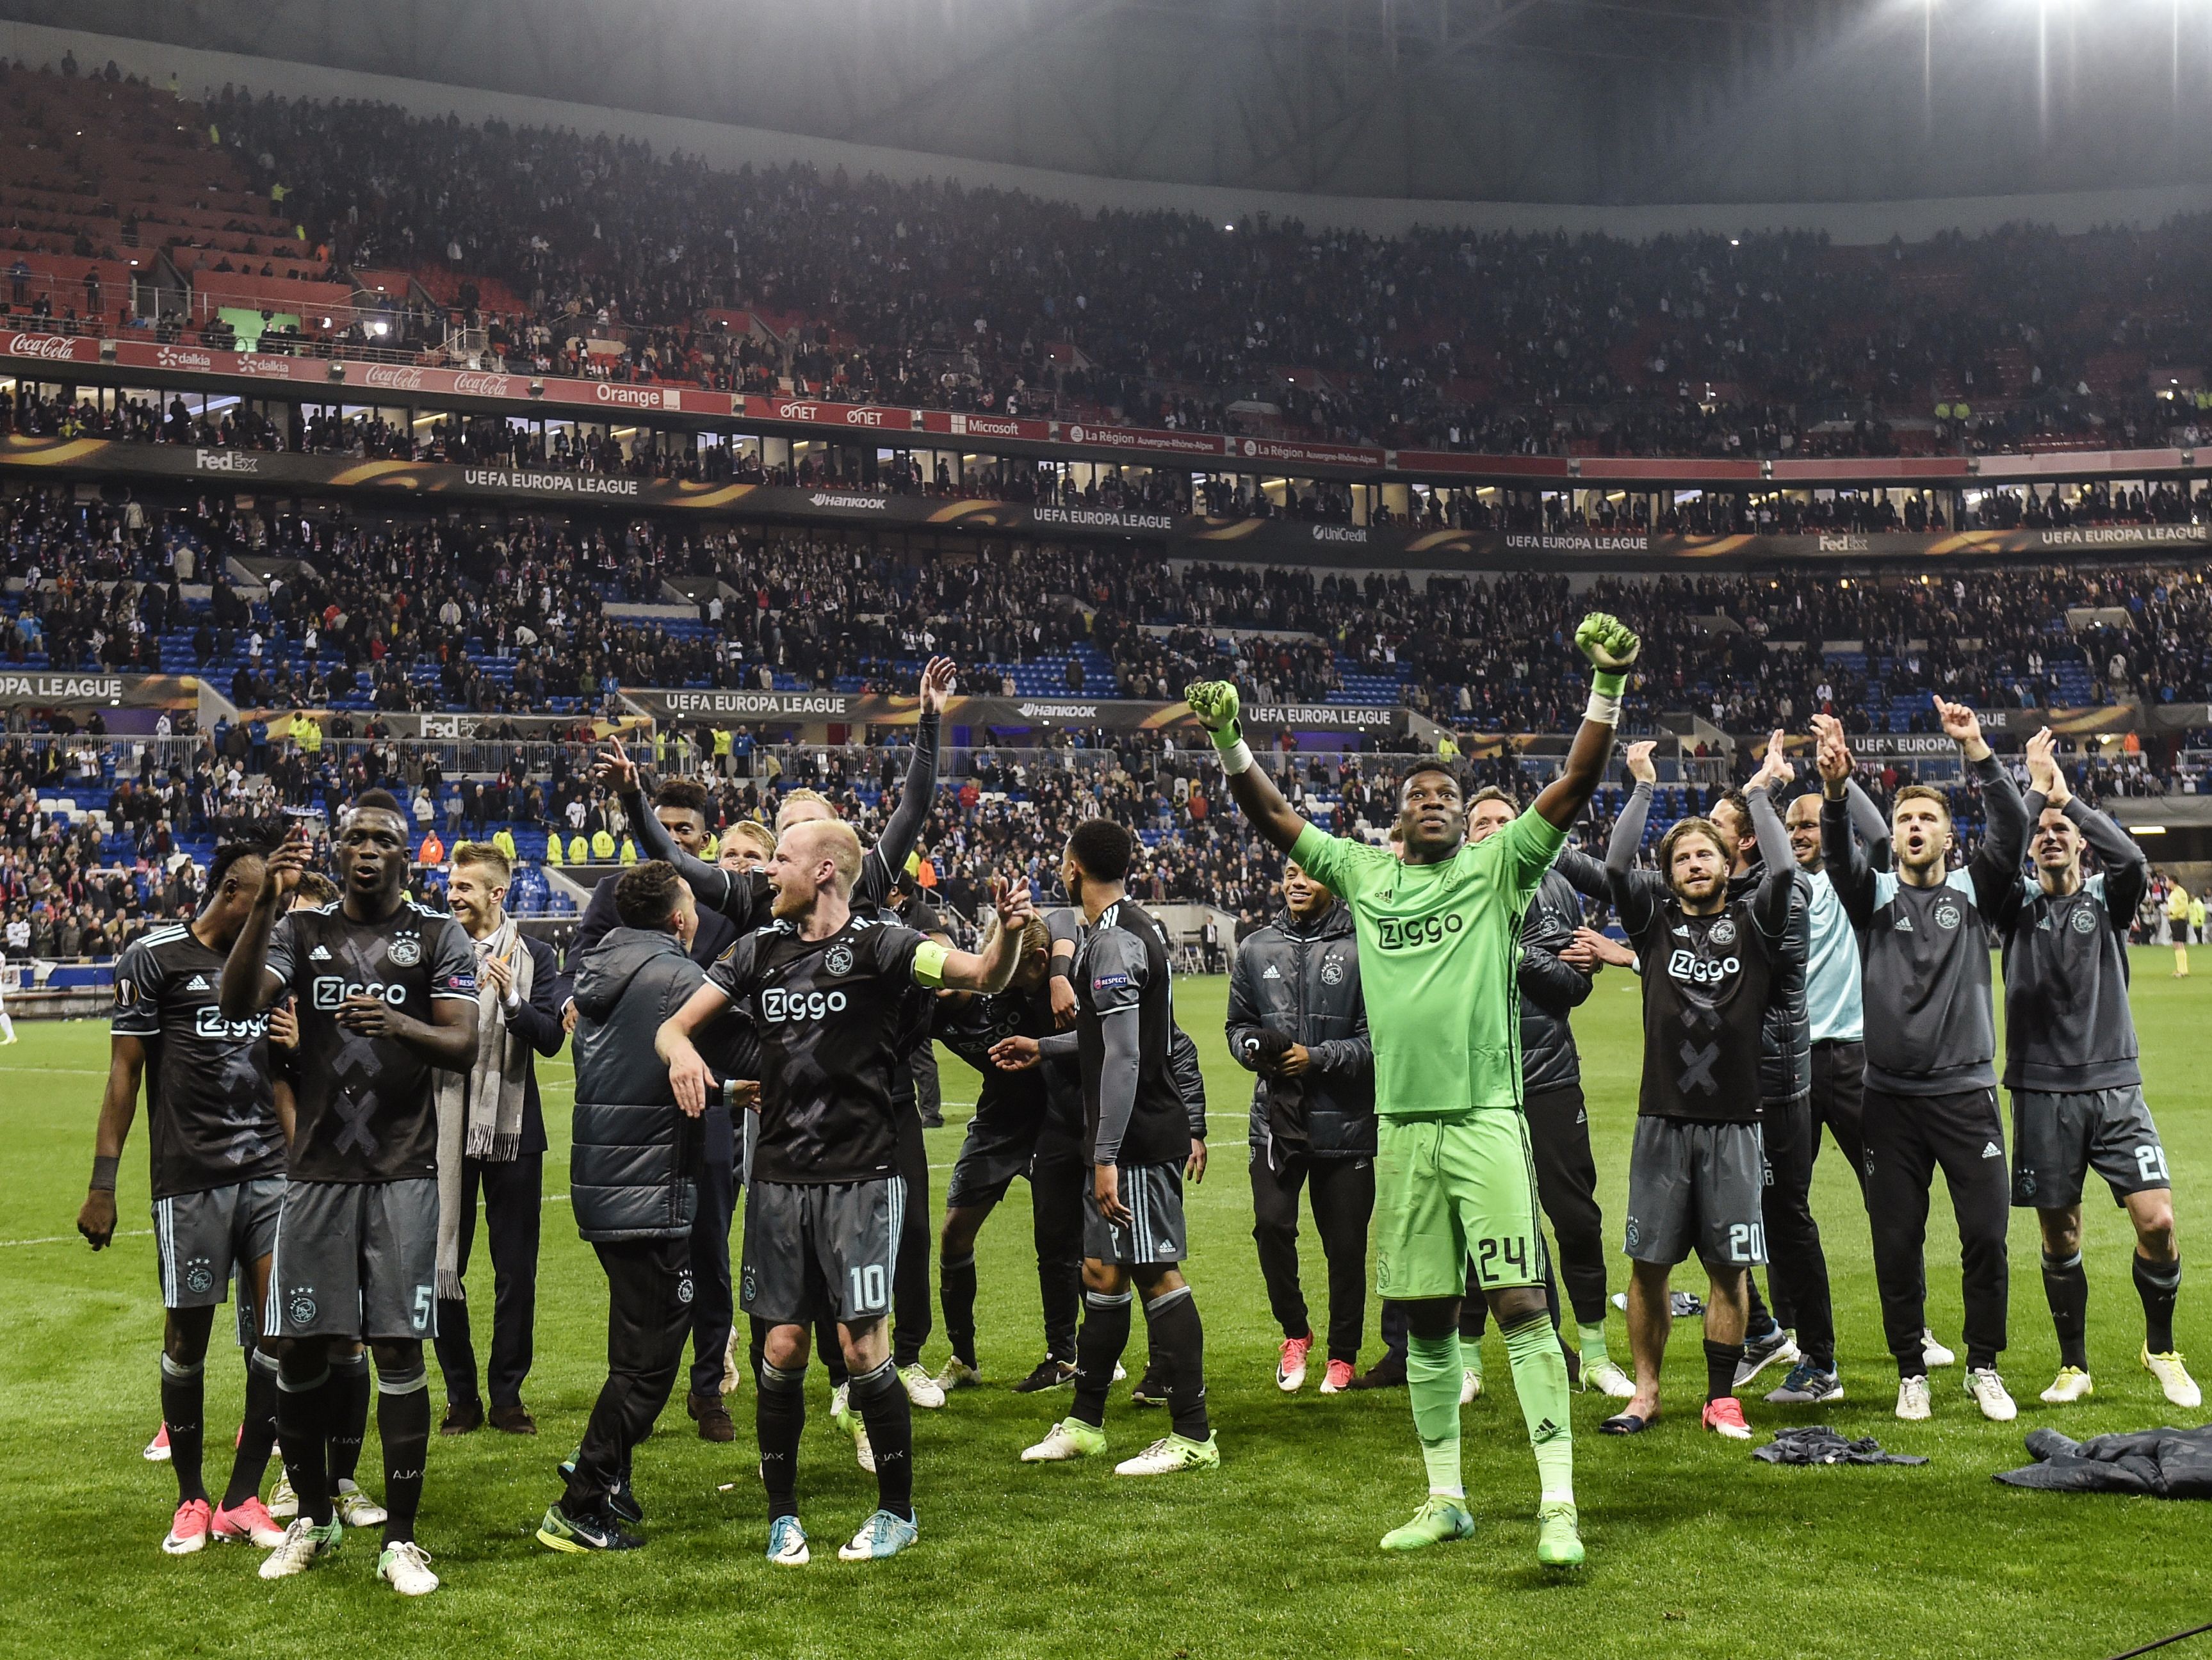 Ajax' players celebrate their victory in the Europa League semi-final football match Olympique Lyonnais against AFC Ajax, on May 11, 2017 at the Parc Olympique Lyonnais stadium in Décines-Charpieu near Lyon, southeastern France.    / AFP PHOTO / PHILIPPE DESMAZES        (Photo credit should read PHILIPPE DESMAZES/AFP/Getty Images)